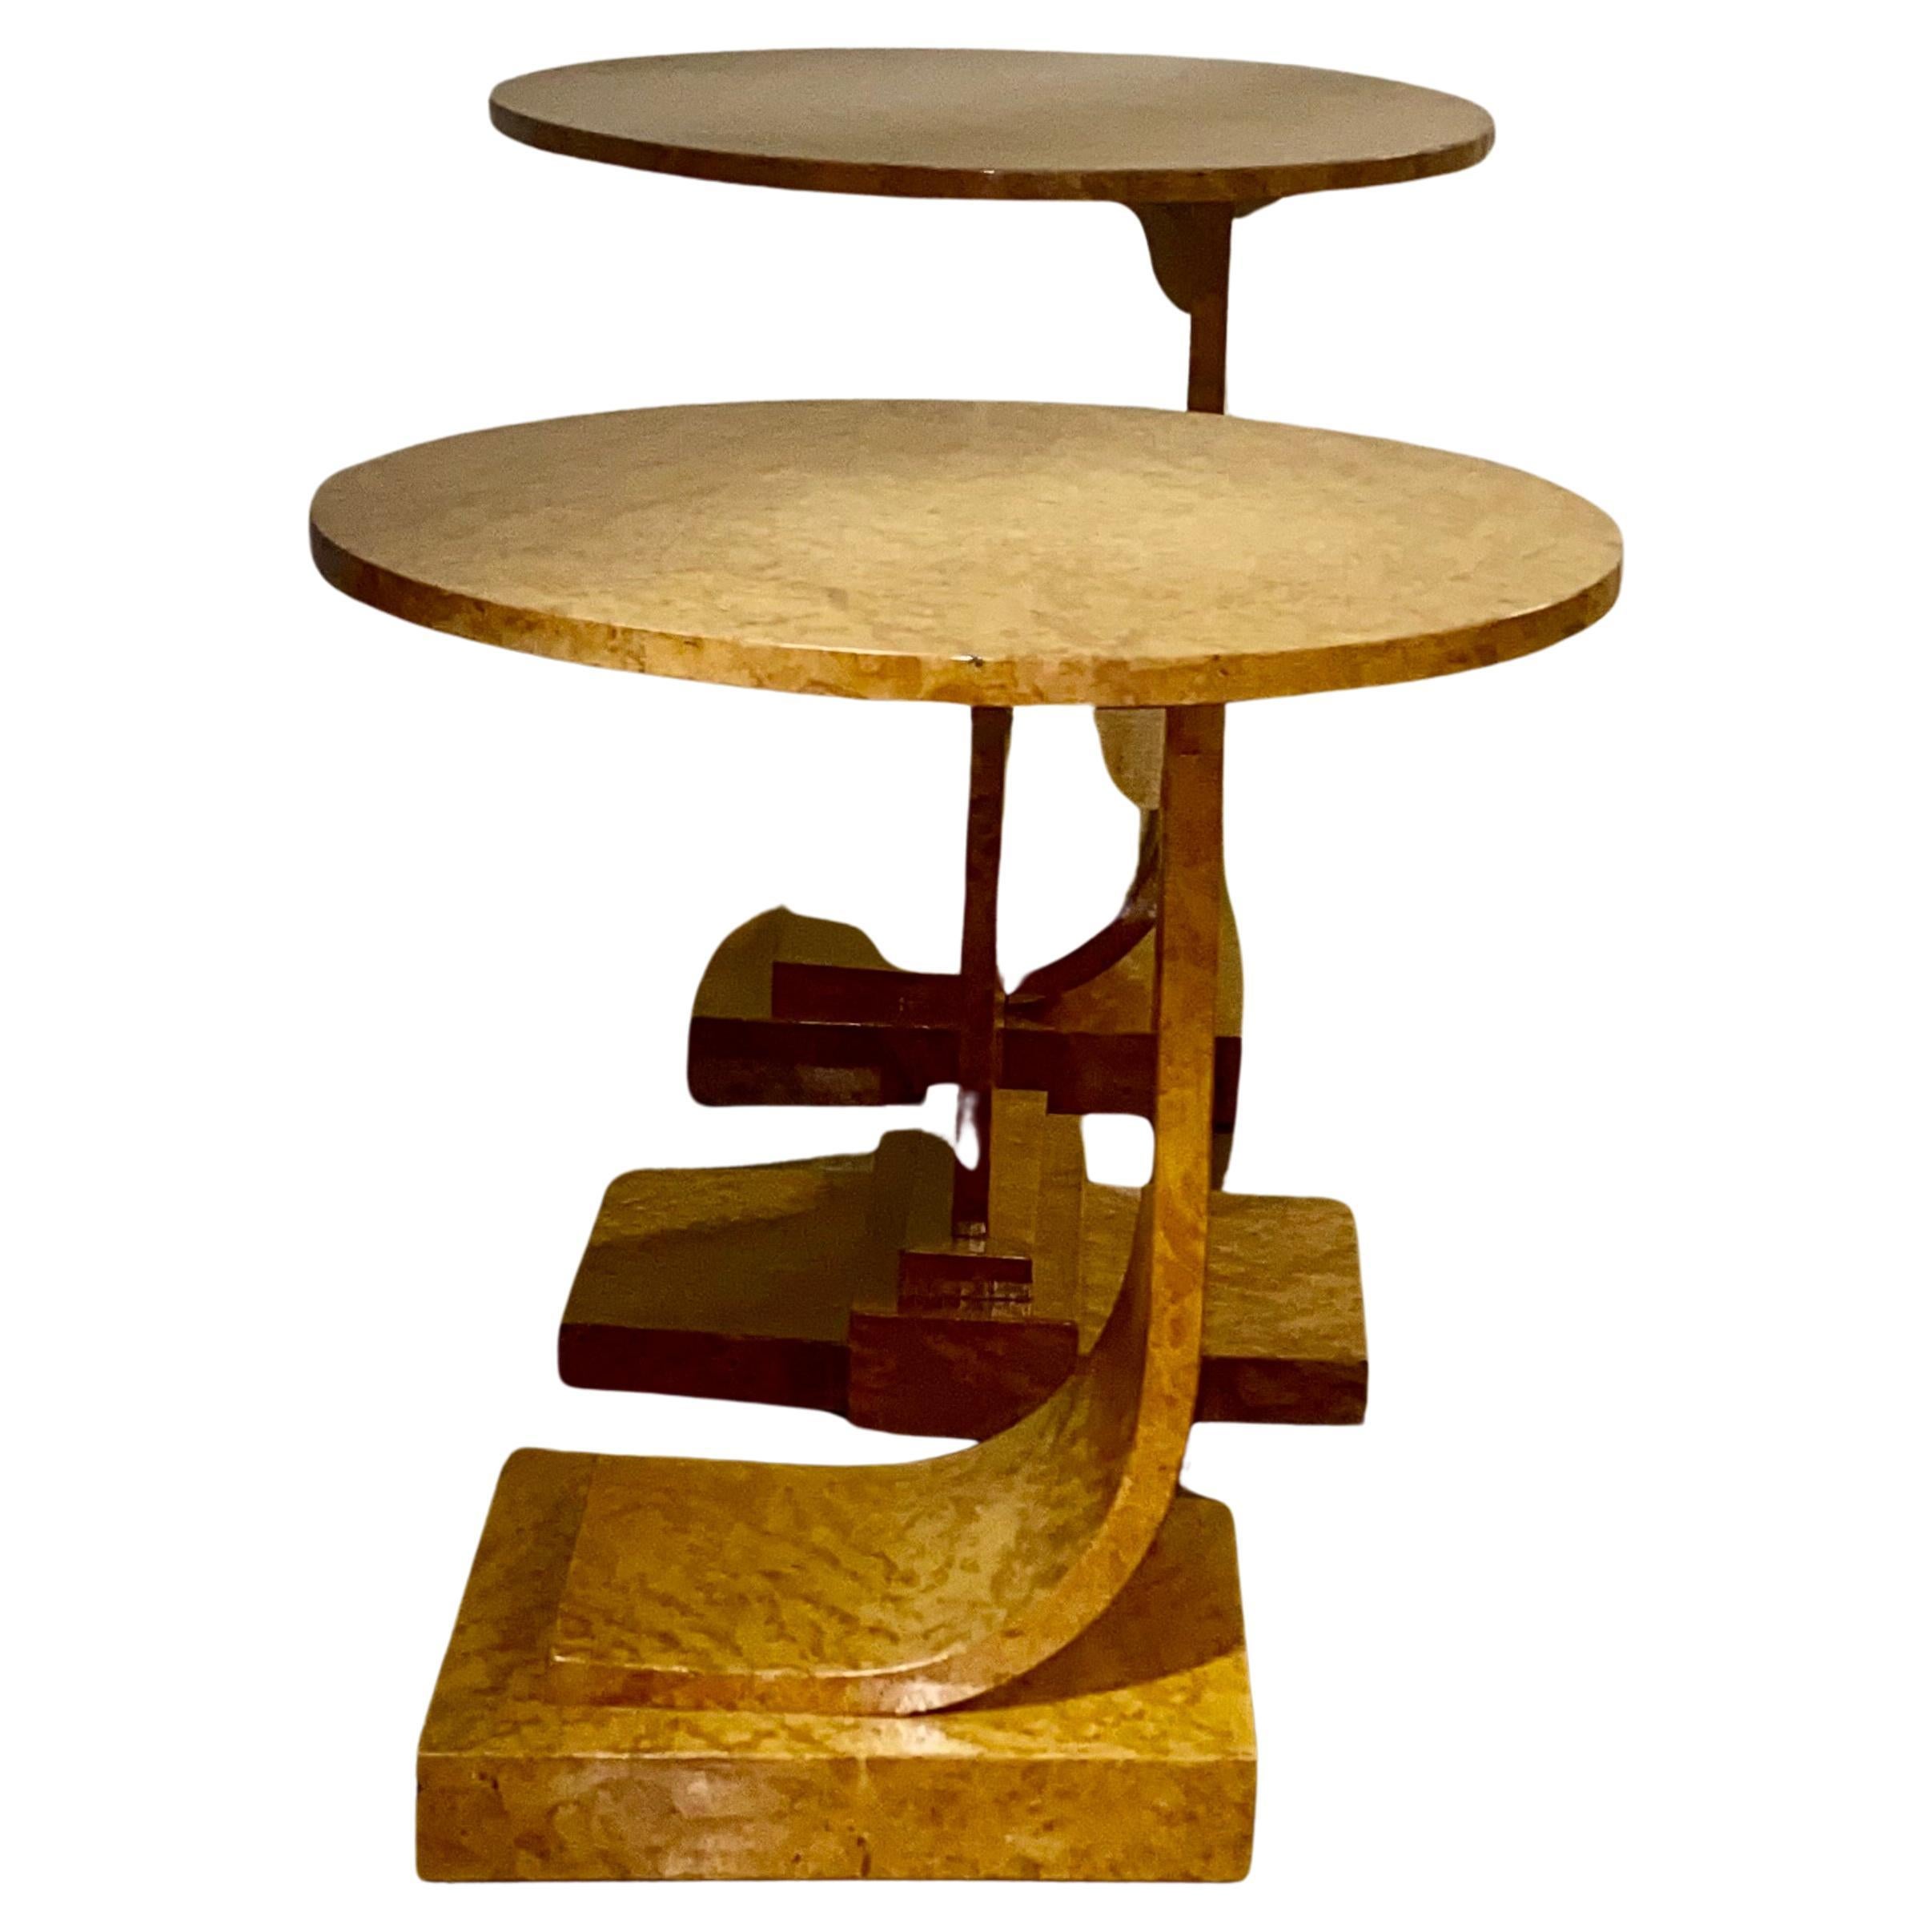 A Rare Art Deco Blonde Birds Eye Maple J Nest of Tables by Epstein Circa 1930 For Sale 5